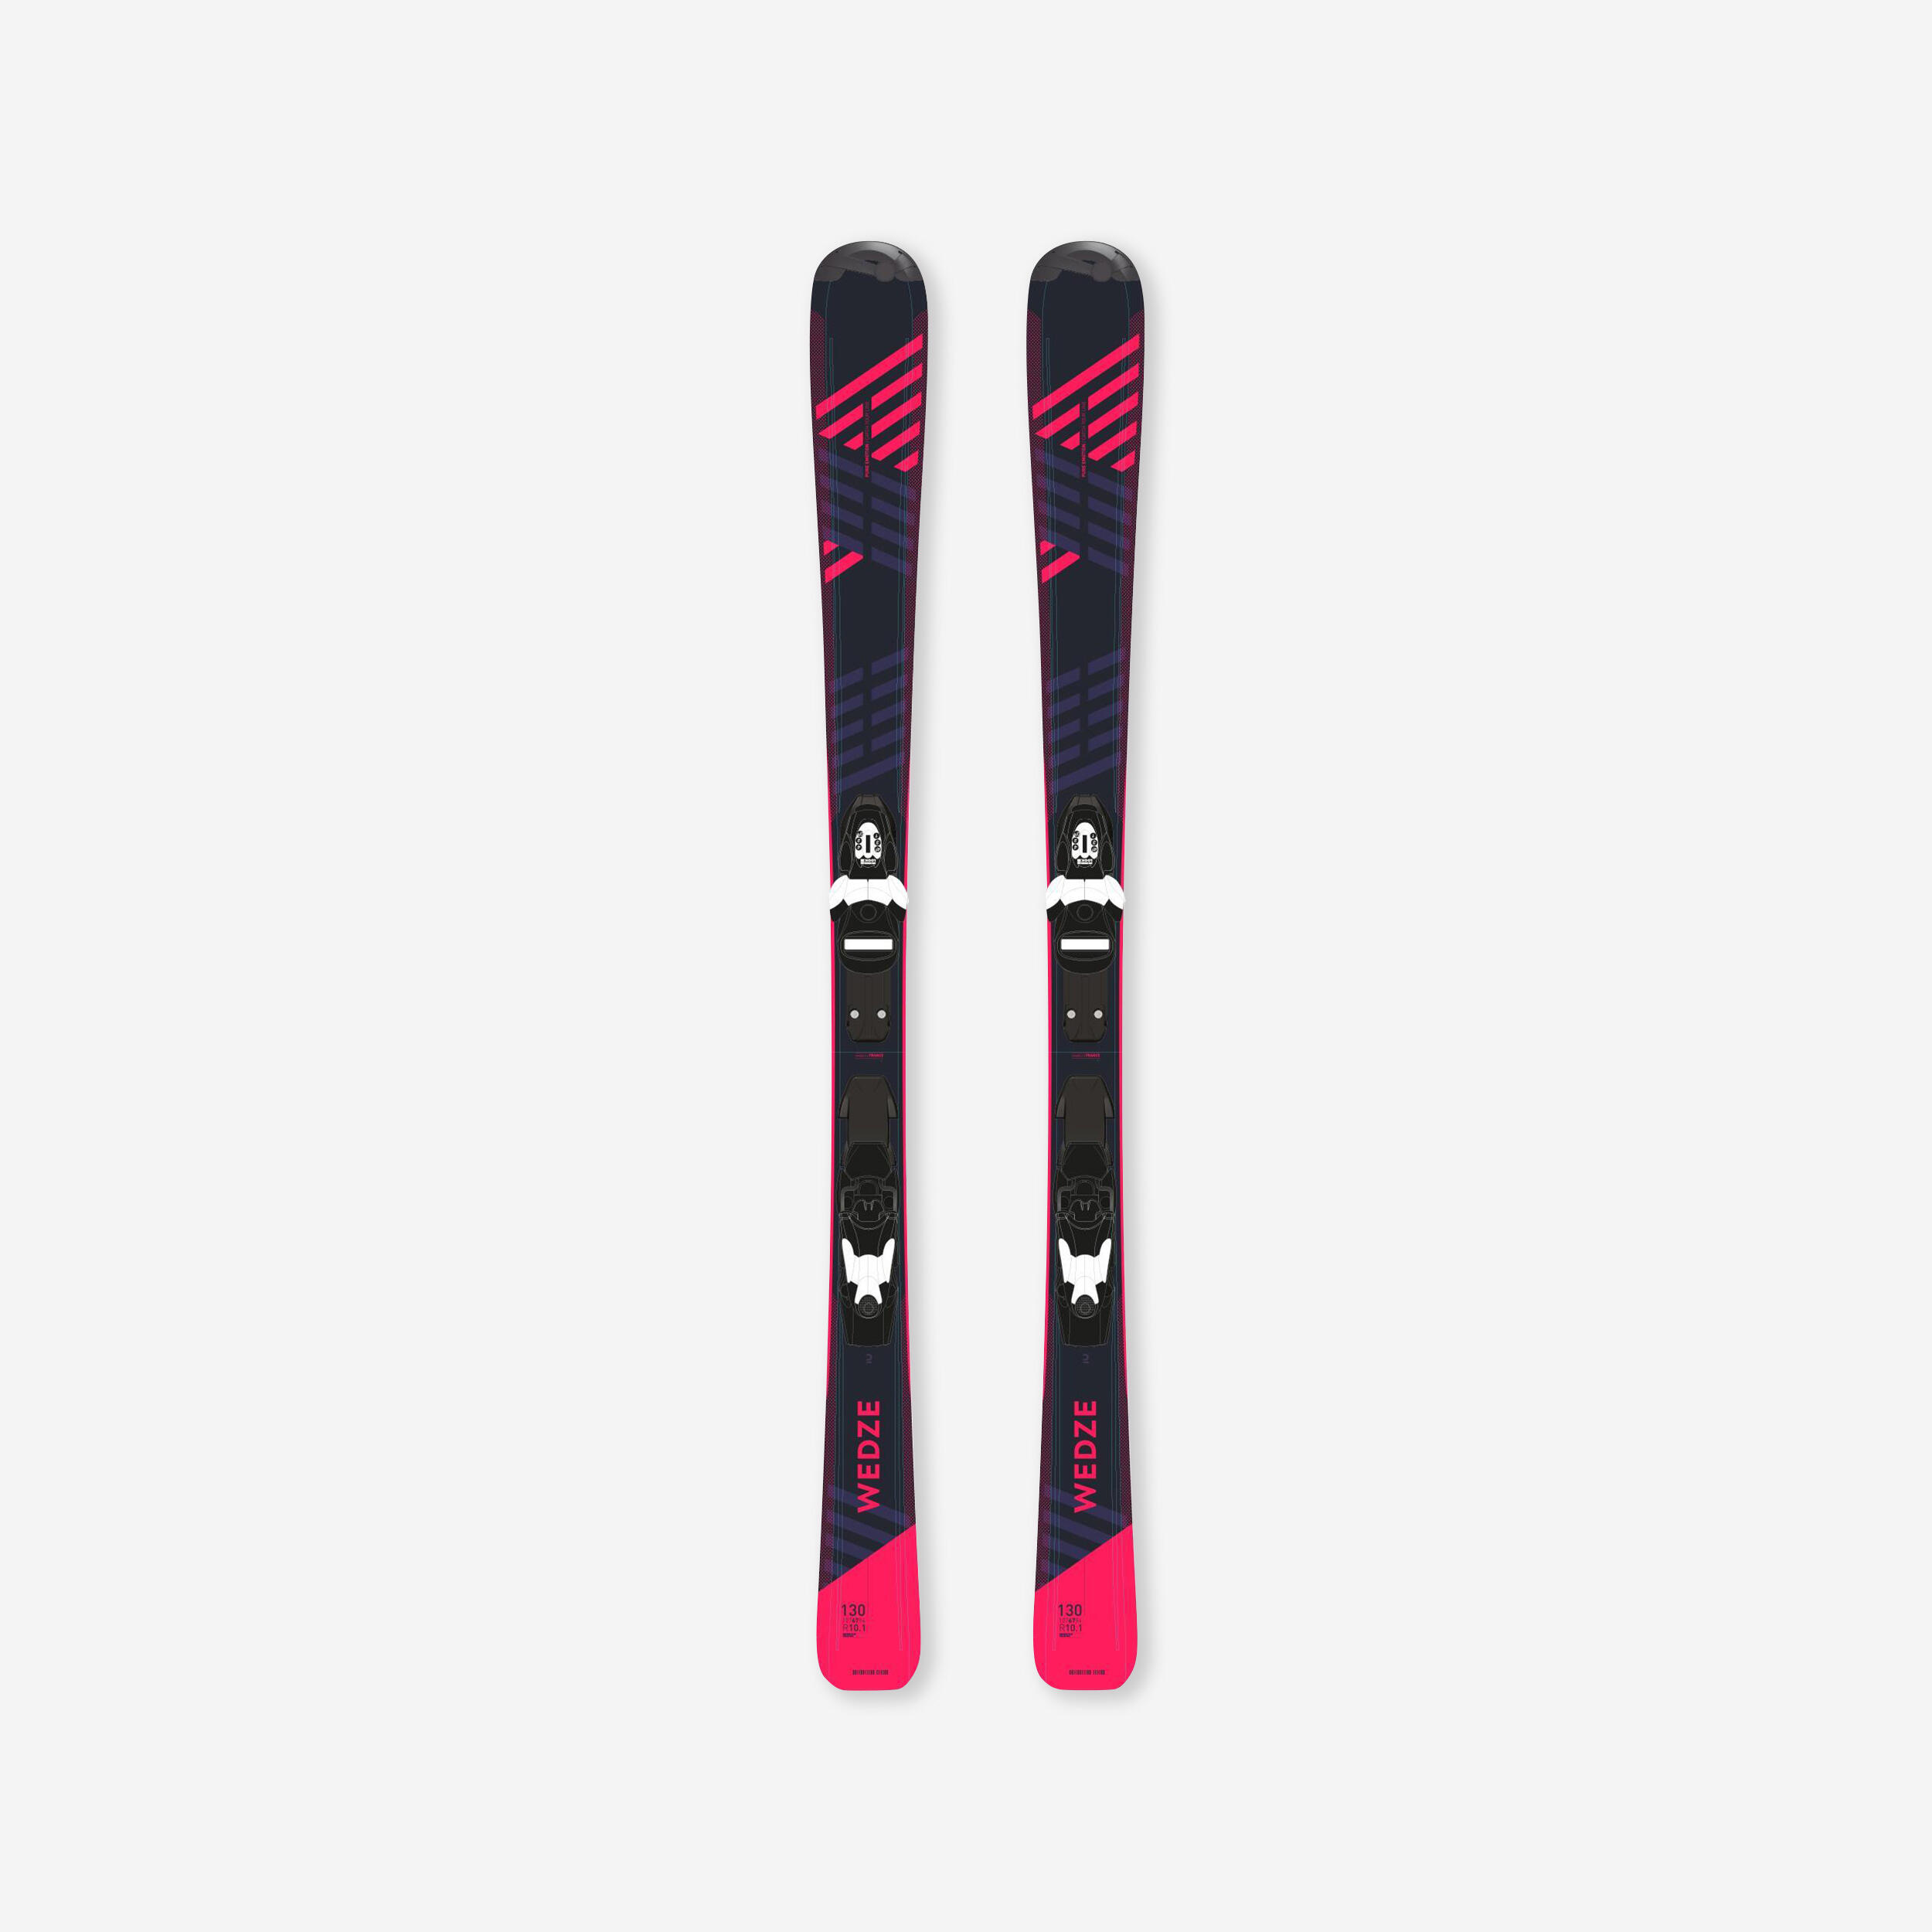 WOMEN’S DOWNHILL SKIS WITH BINDING - BOOST 500 - BLUE/PINK 1/11